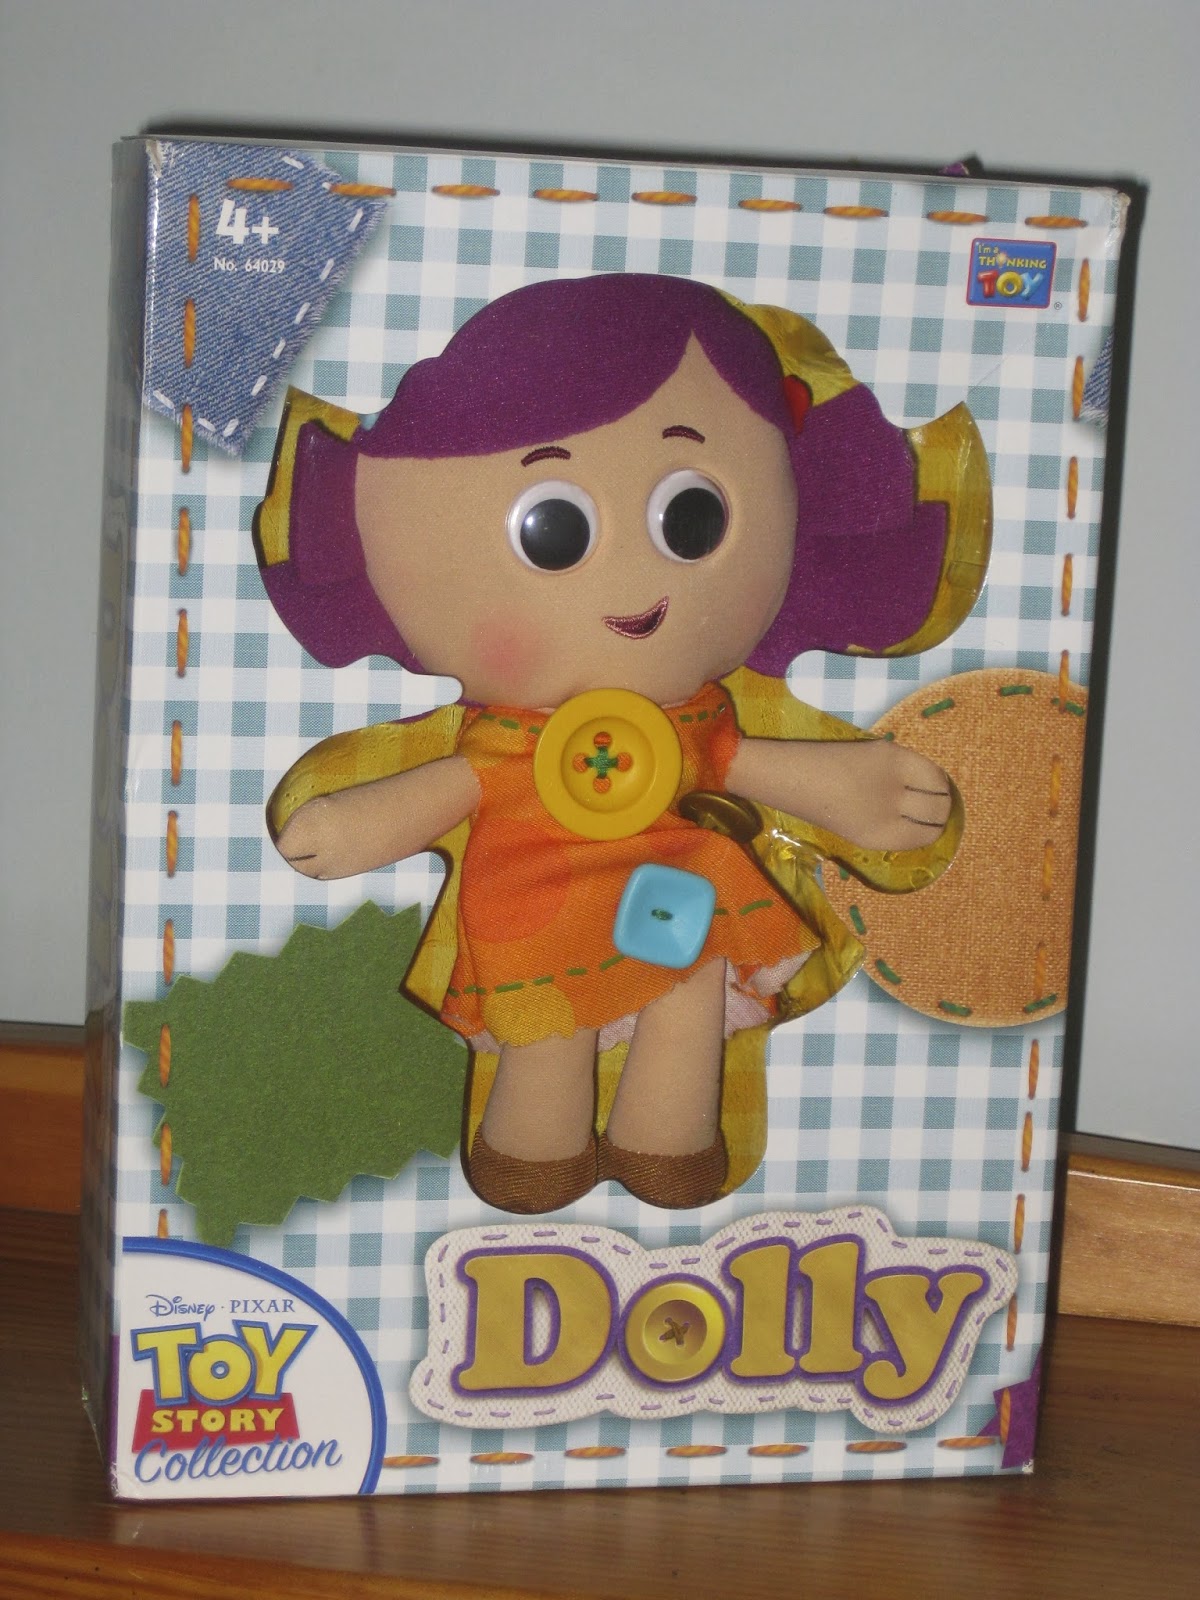 Pixar Toy Story Dolly Signature Collection Doll Thinkway Trixie Bonnie plush